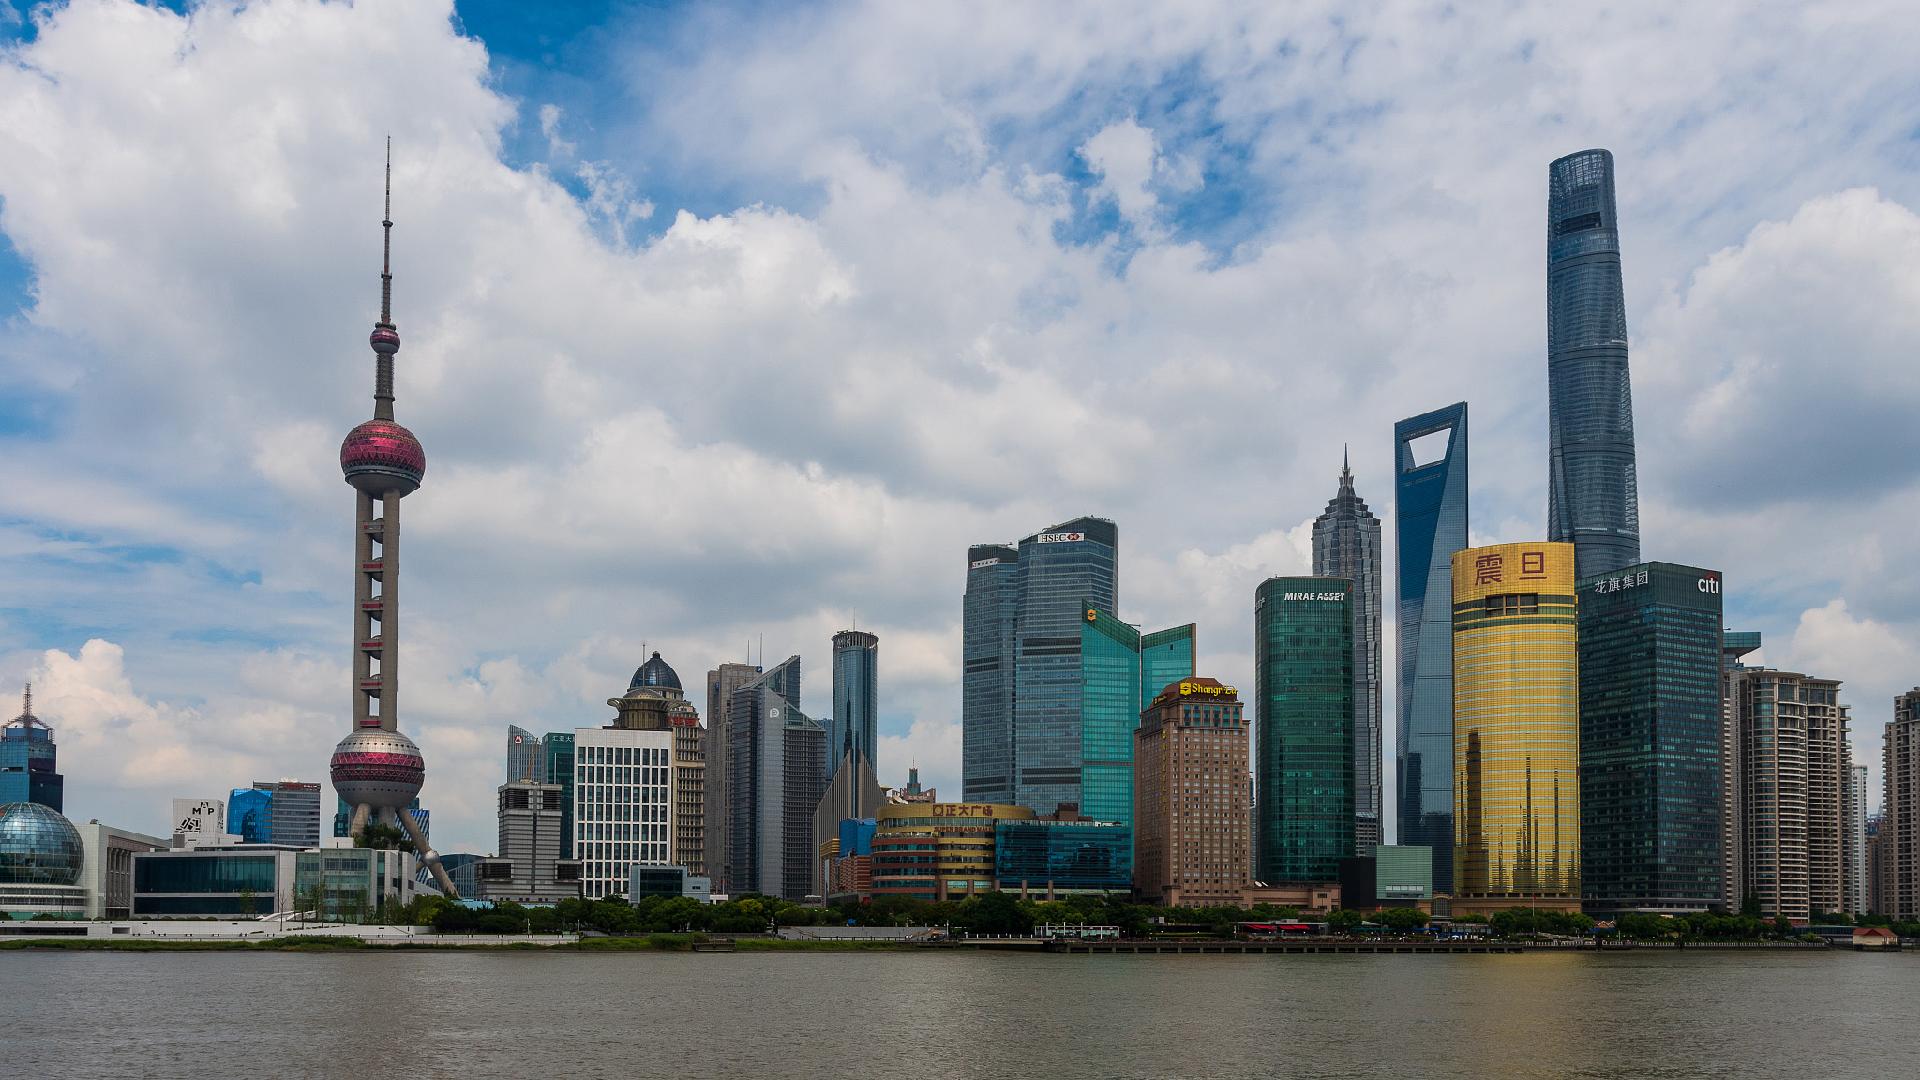 Reforms in Shanghai's Pudong aim to help small businesses - CGTN